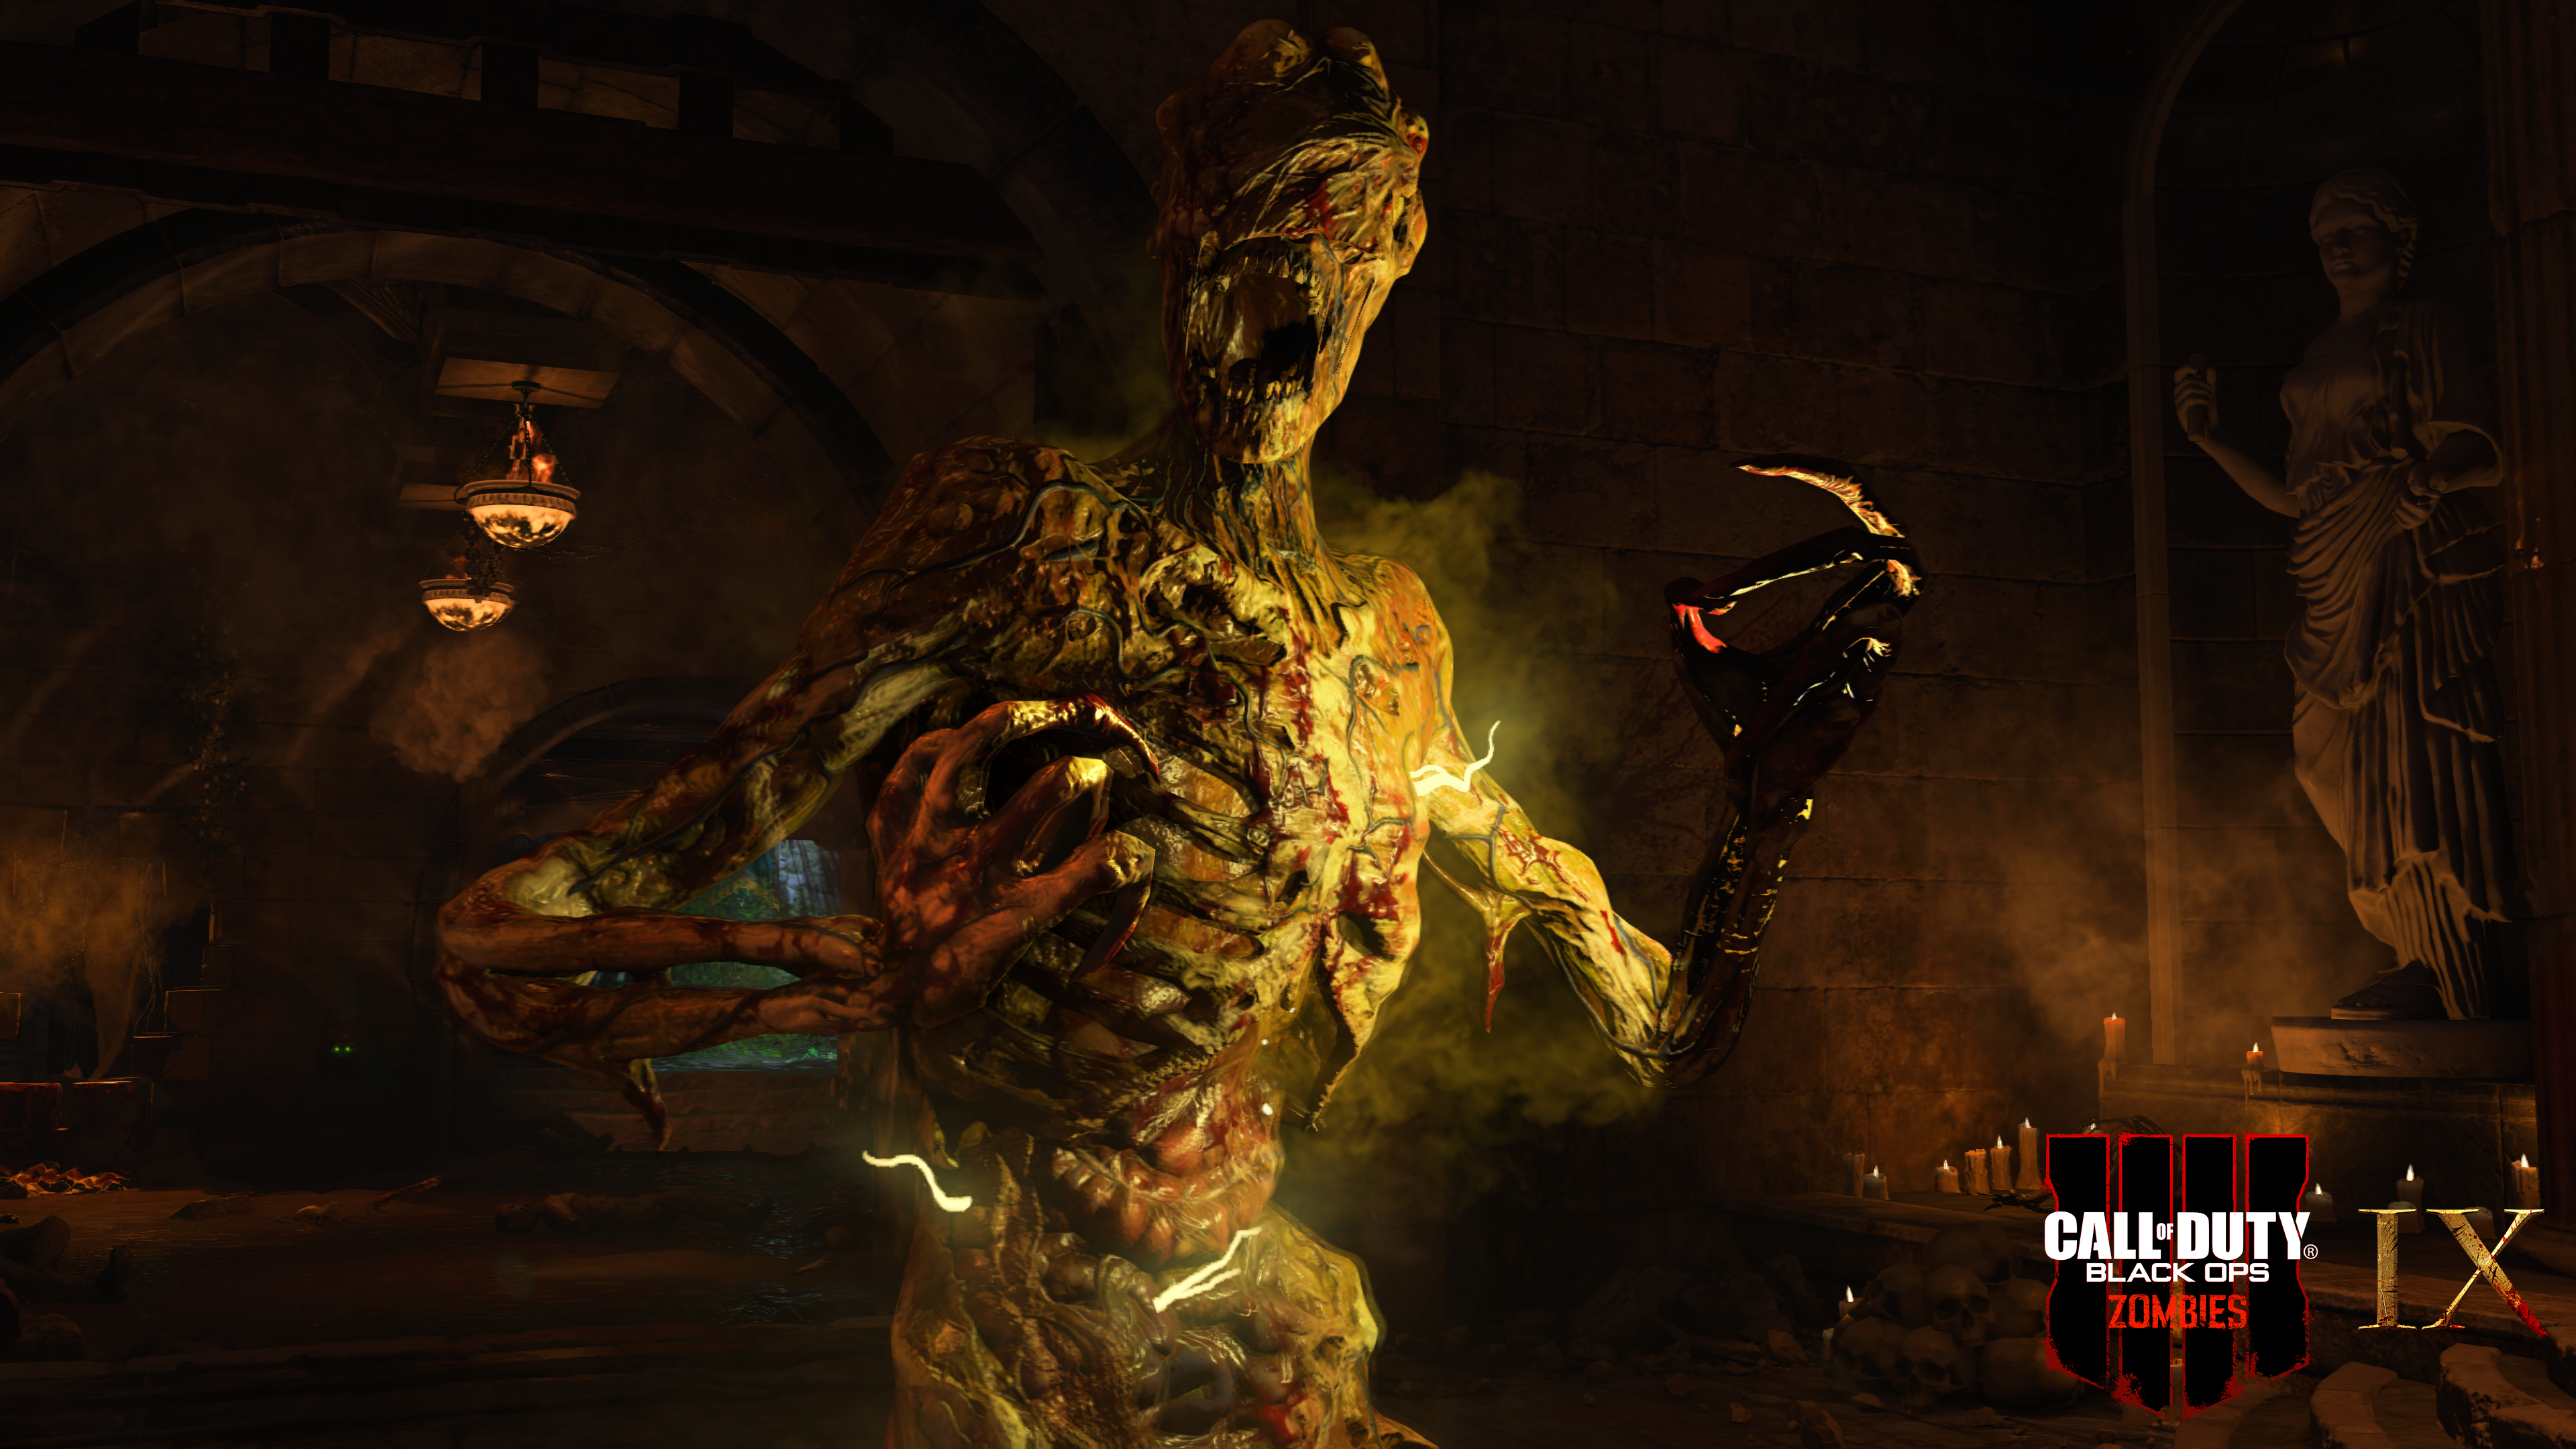 Call Of Duty: Black Ops 4 Zombies screencap (Activision/Treyarch)